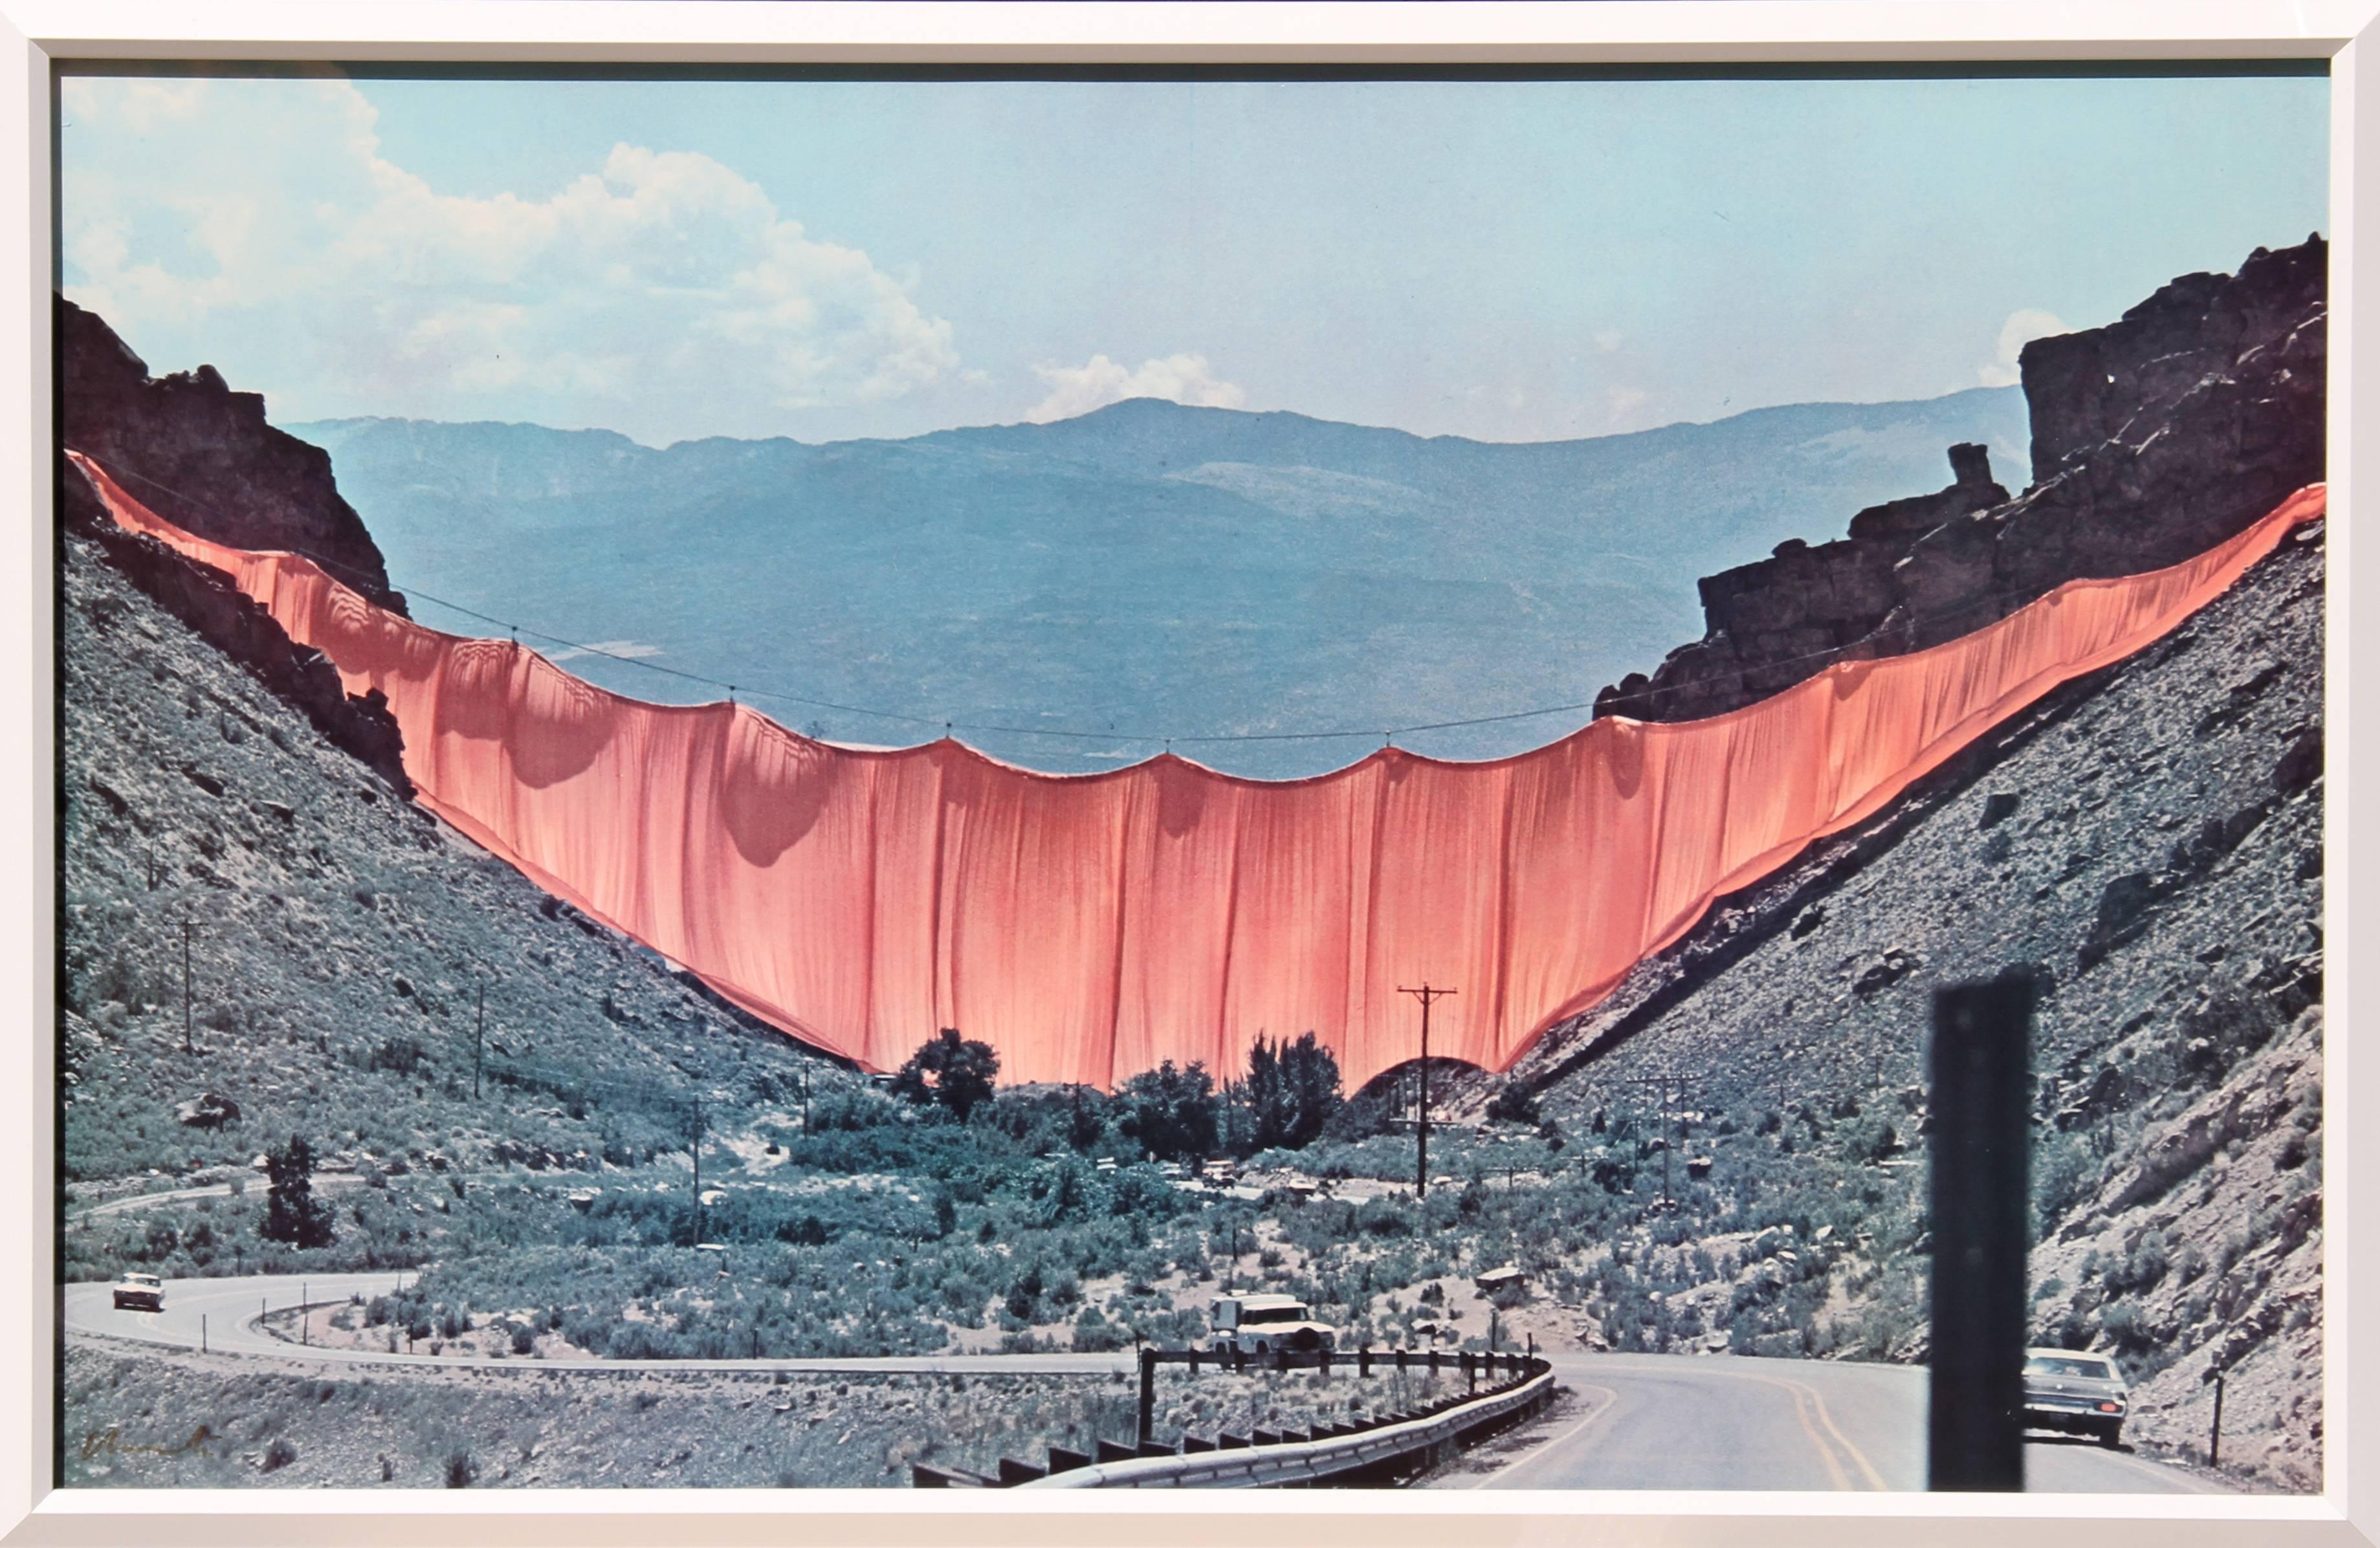 Valley Curtain, Rifle Colorado - Print by Christo and Jeanne-Claude